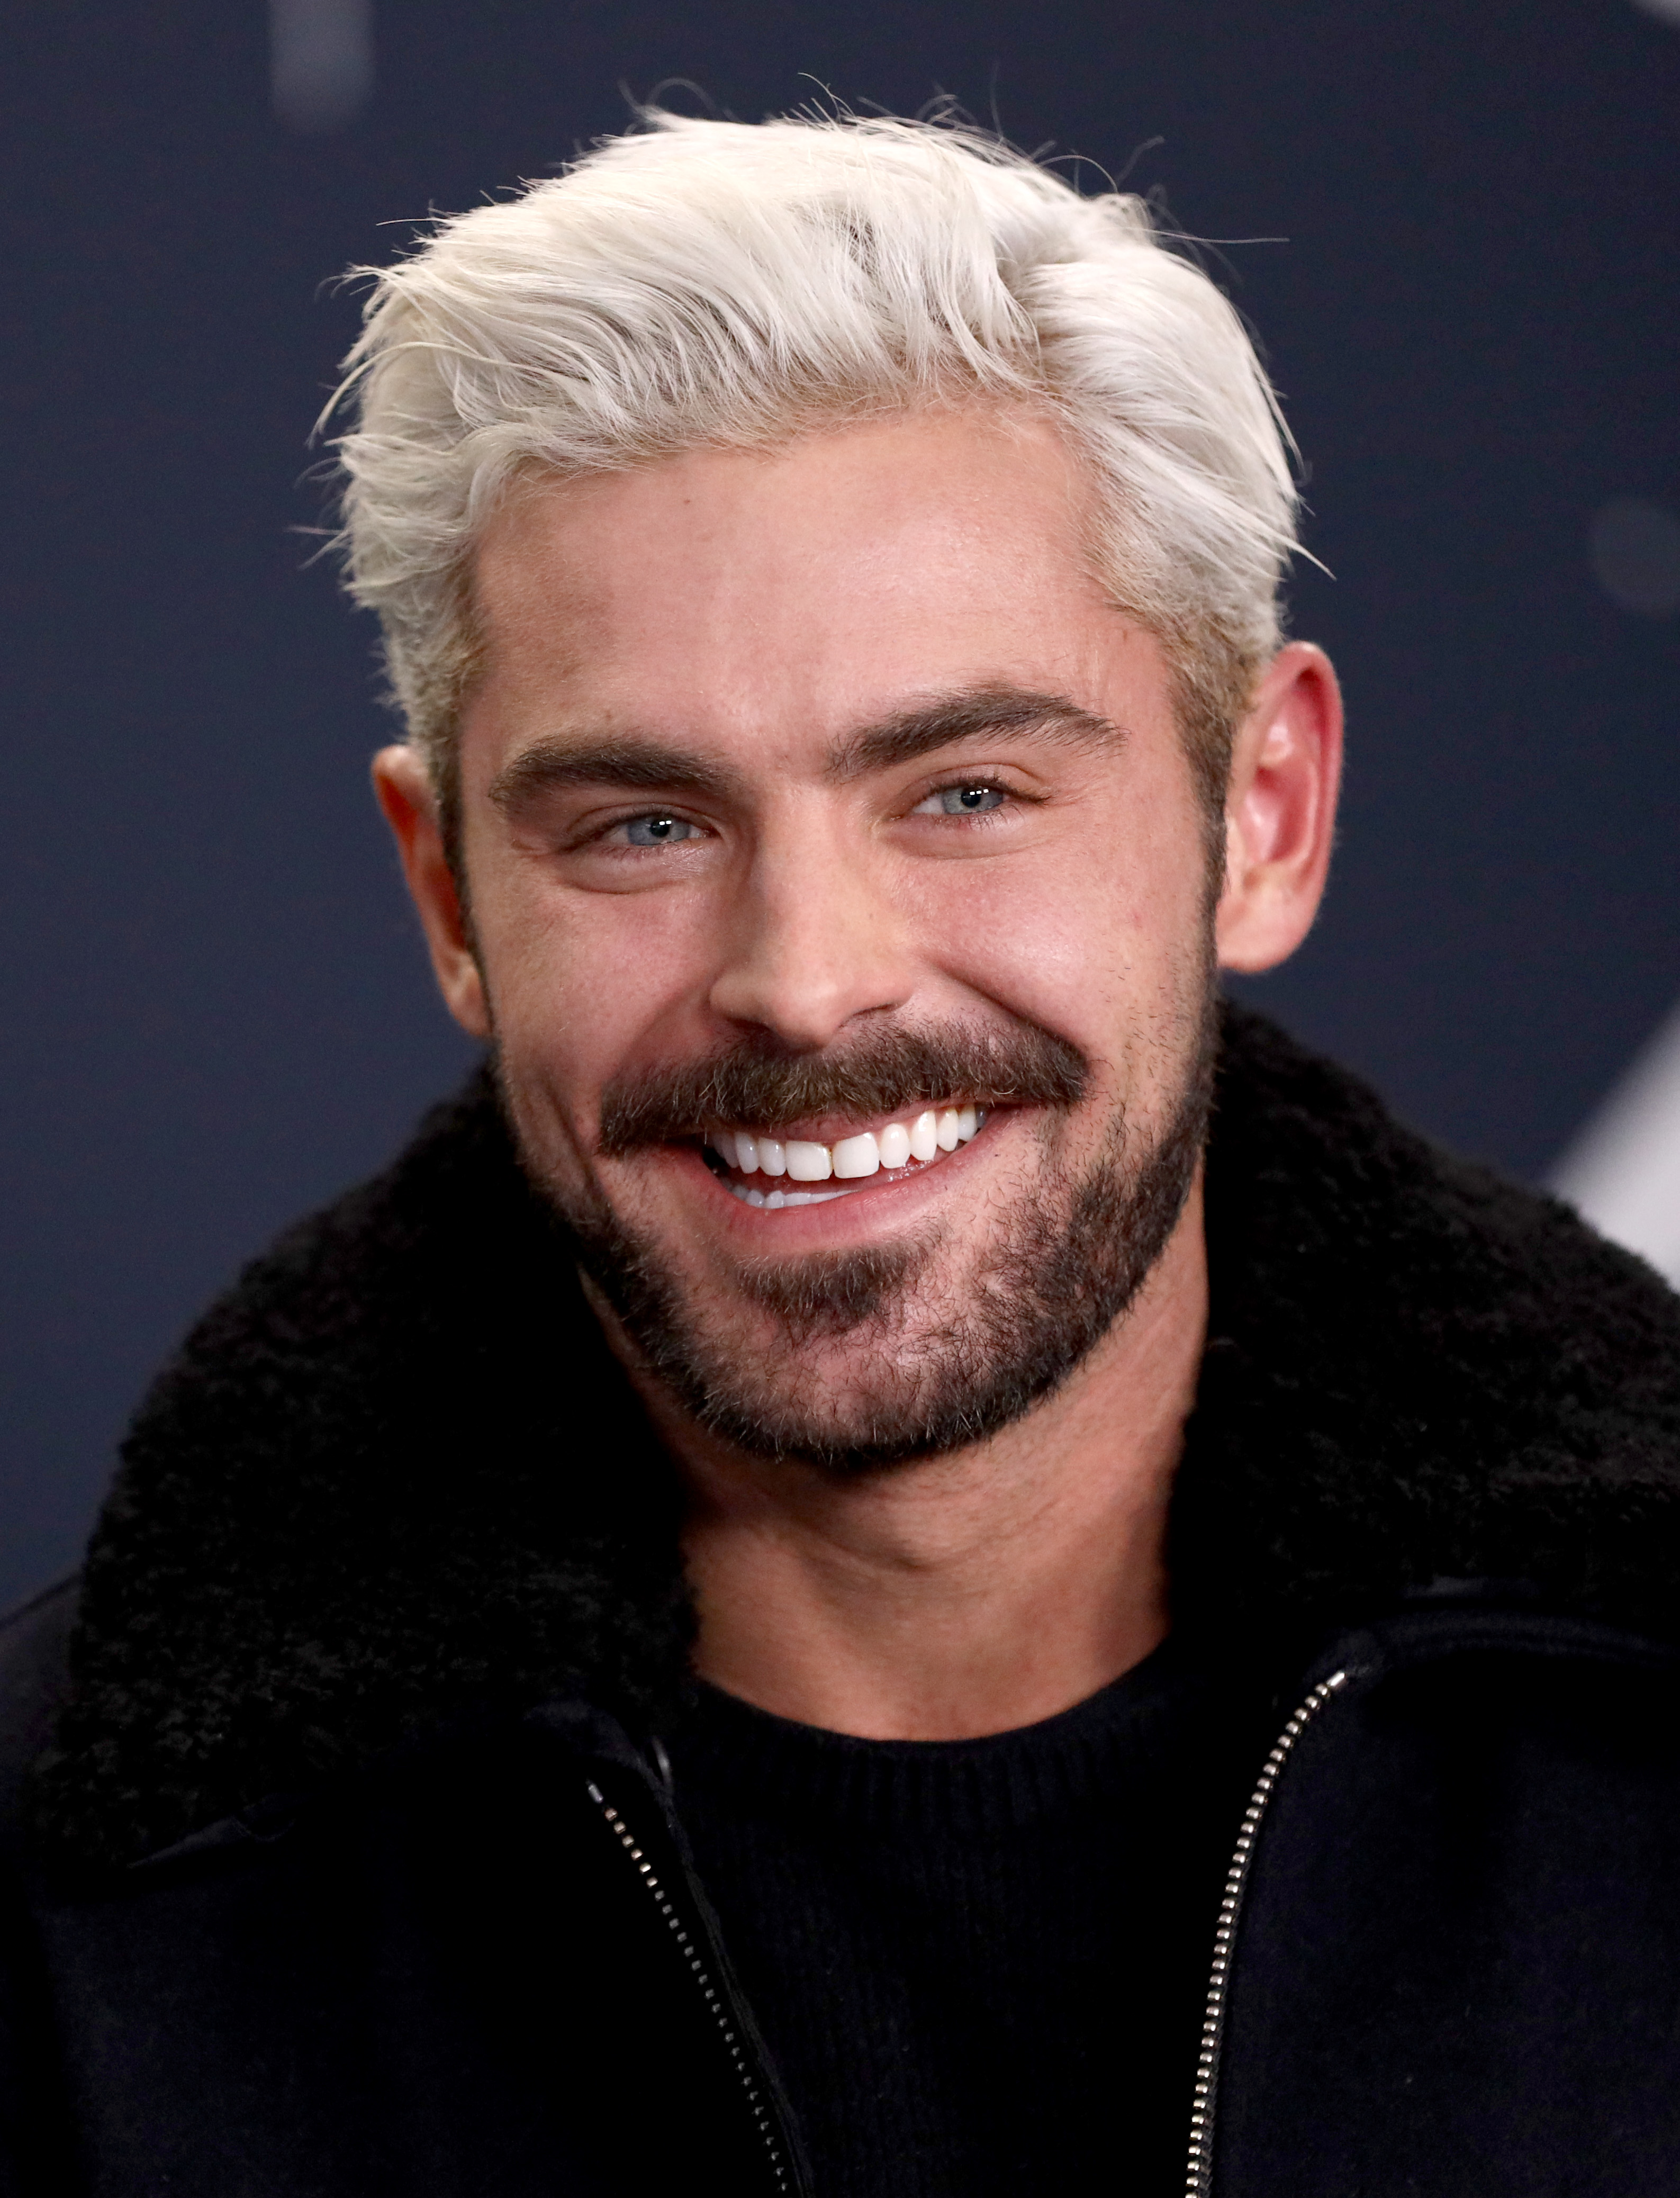 Zac Efron at day 2 of The 2019 Sundance Film Festival on January 26, in Park City, Utah. | Source: Getty Images